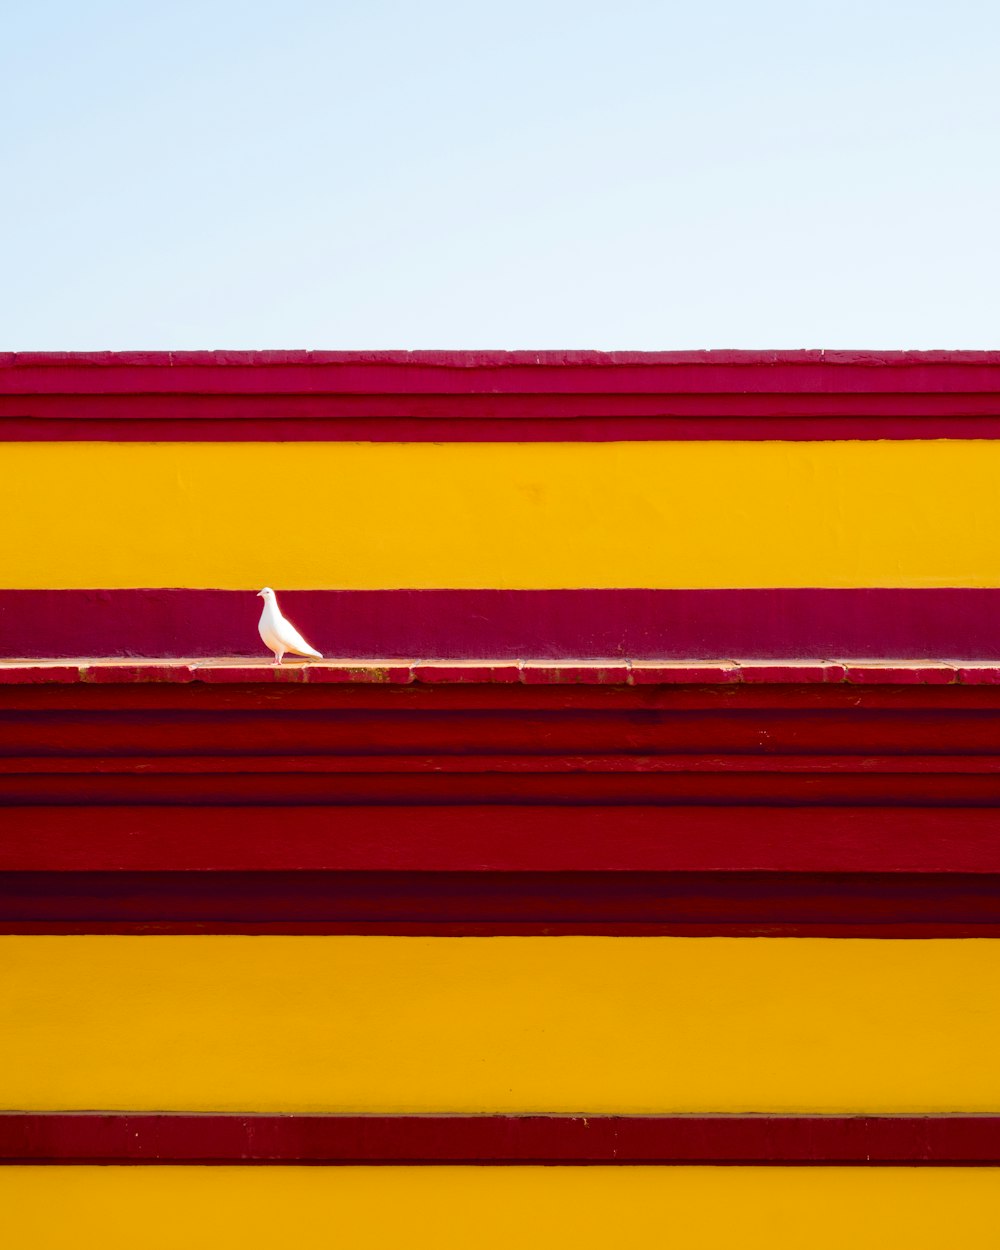 a white bird sitting on top of a red and yellow building